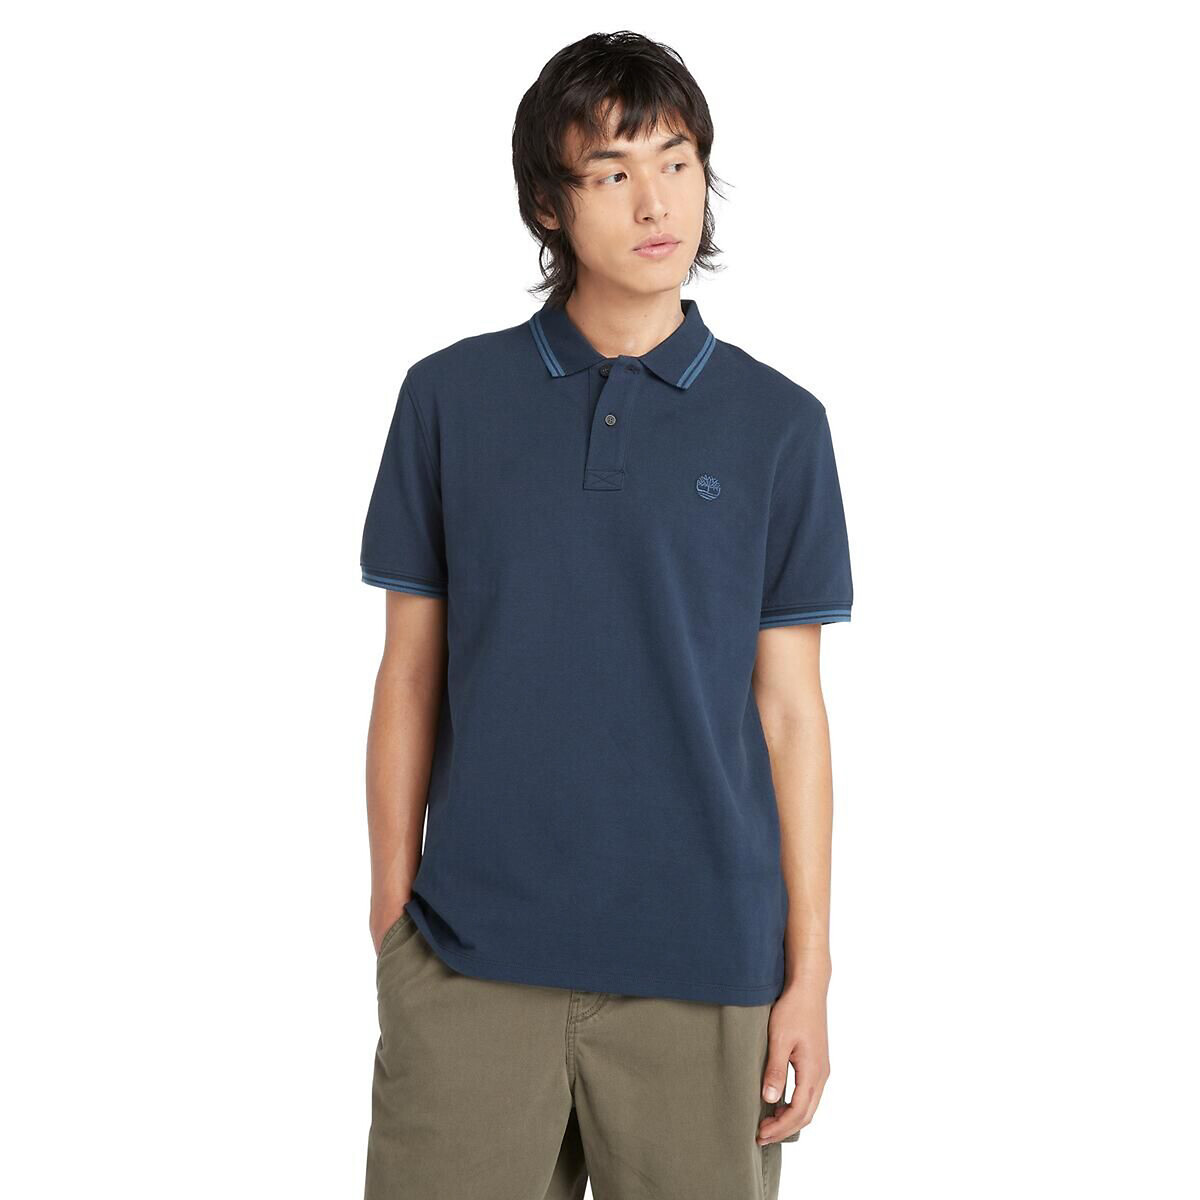 Timberland Polo in piquétricot